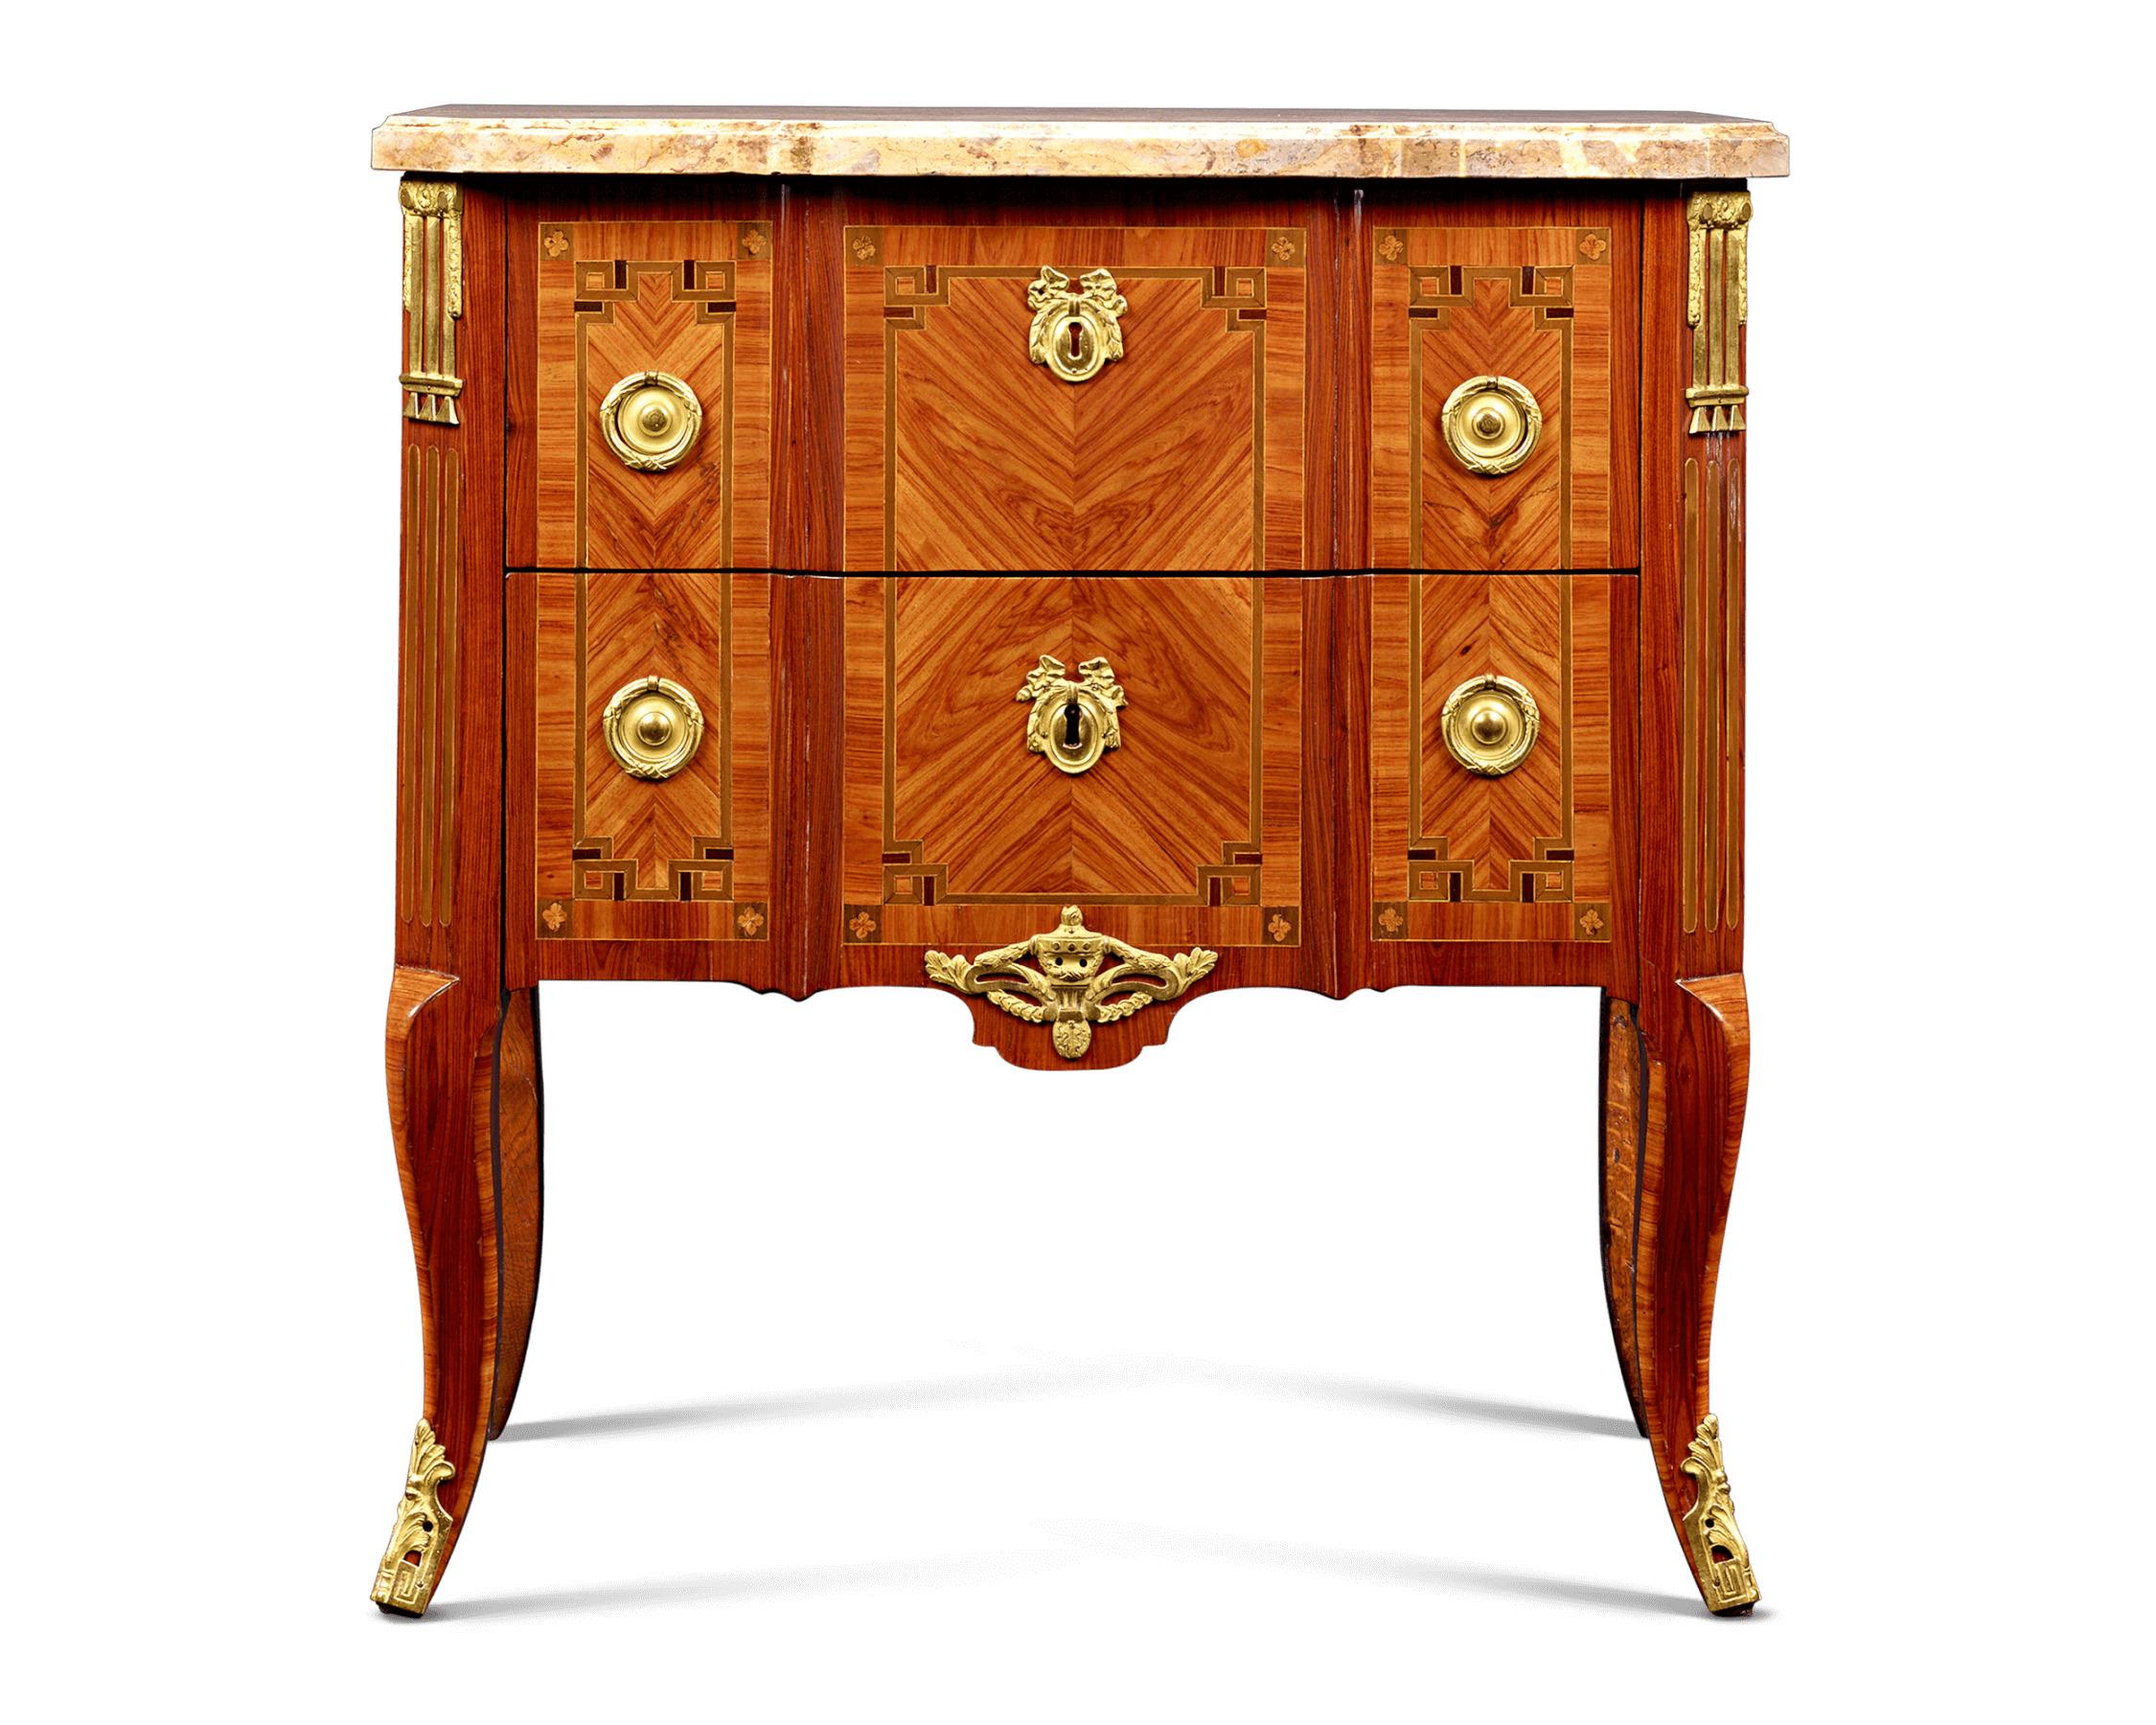 Matchless style and high-quality craftsmanship are the hallmarks of Pierre Roussel's furniture, and this exceptional Louis XVI-era commode epitomizes this master craftsman's skill. Crafted of rosewood veneer with a violet wood frame and intricate